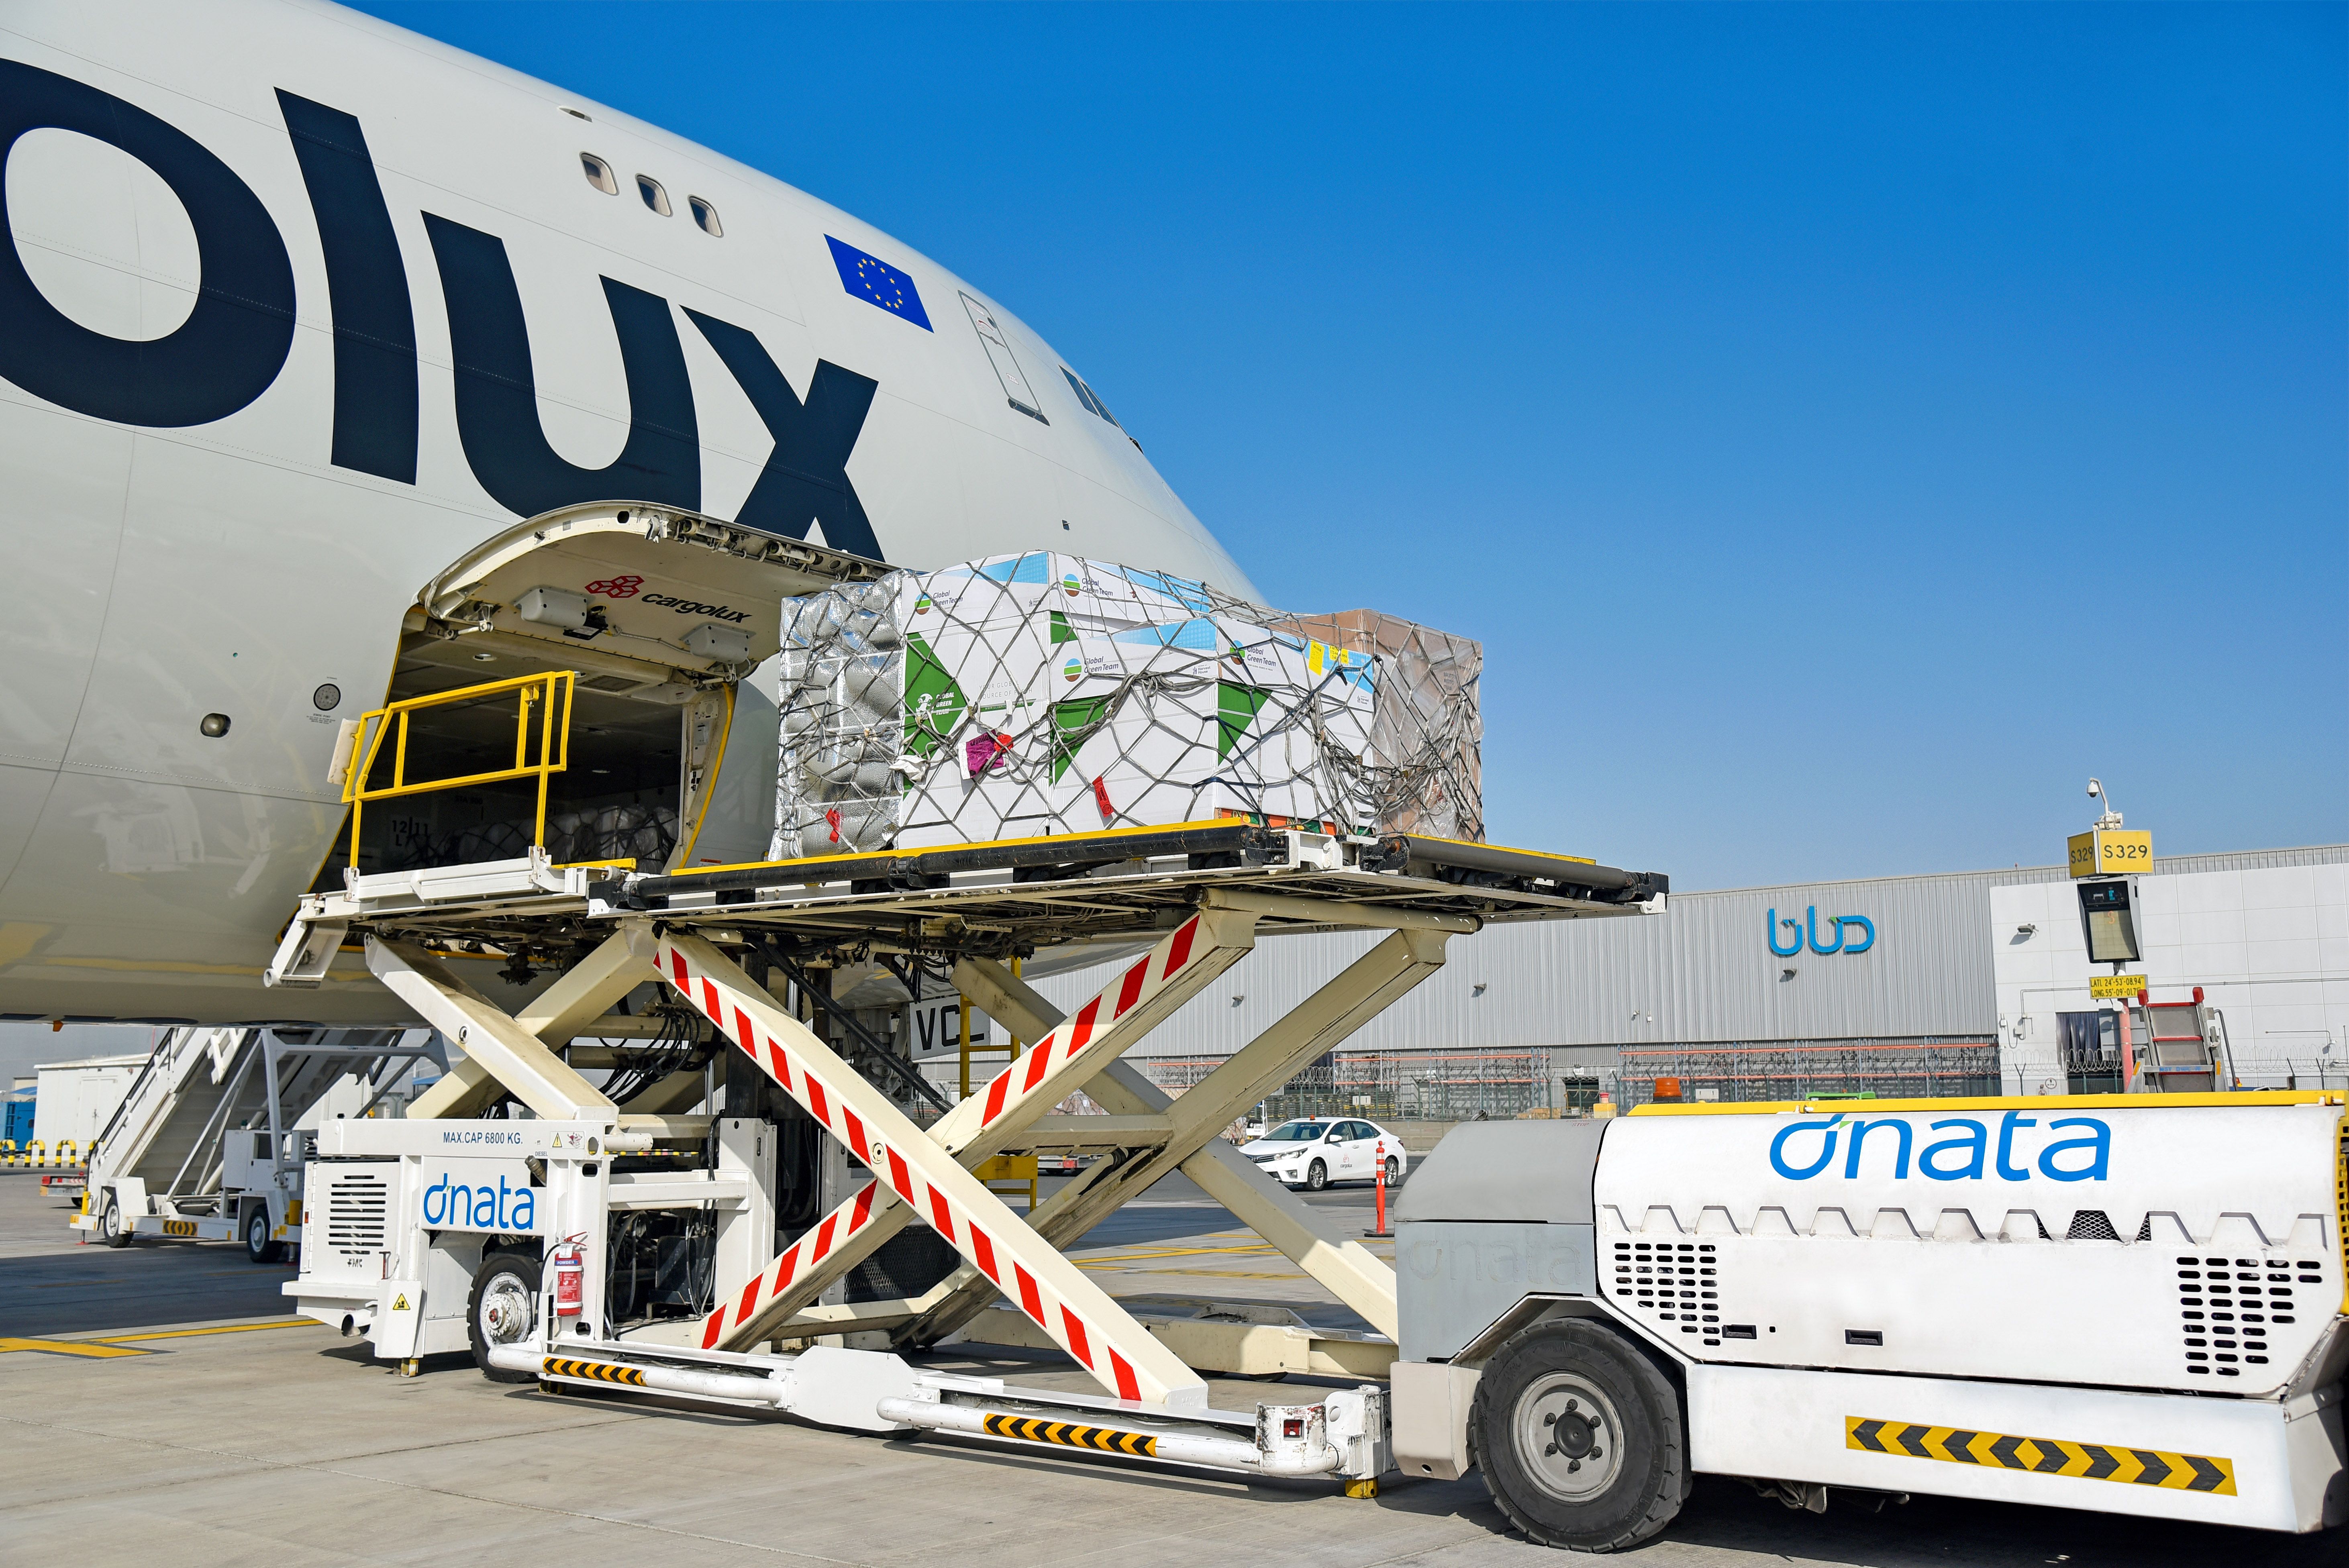 A dnata Vehicle Loading A Cargolux Boeing 747.